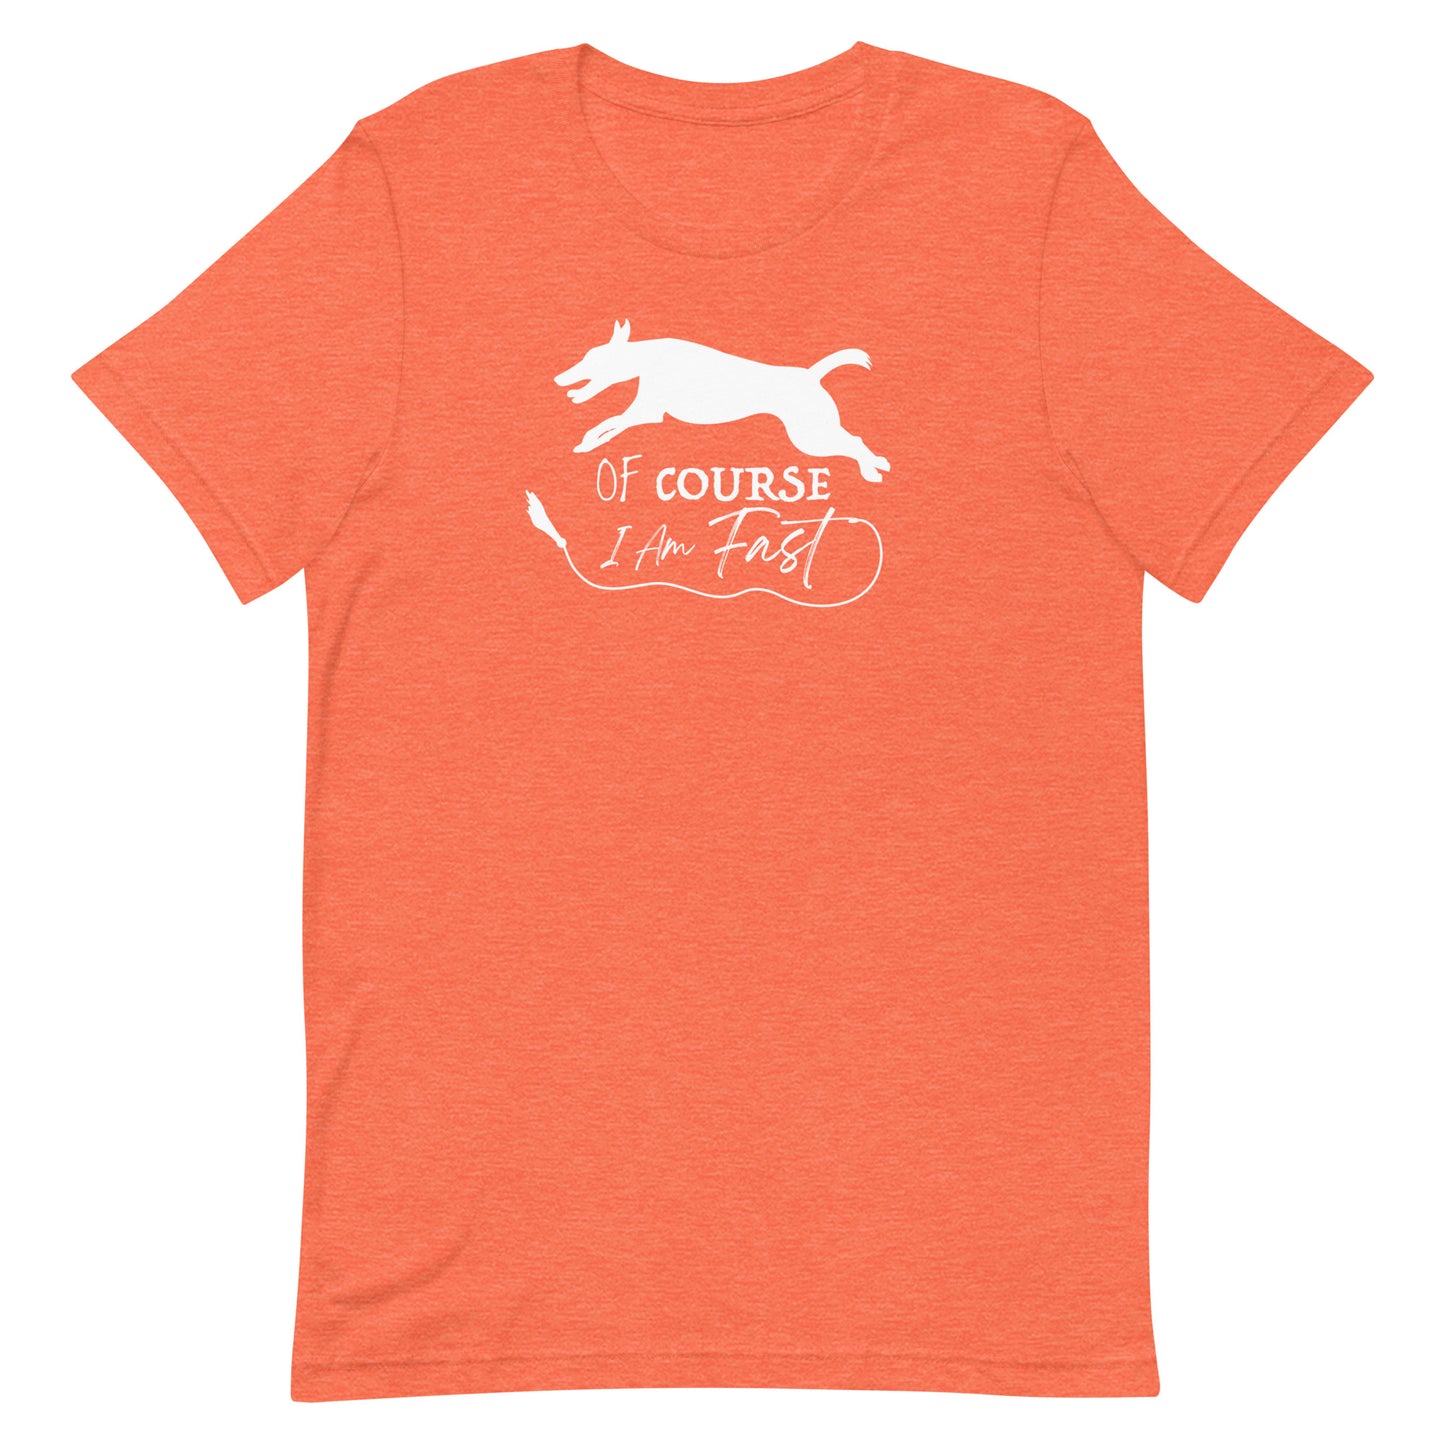 OF COURSE FAST - SMOOTH FOX TERRIER - Unisex t-shirt